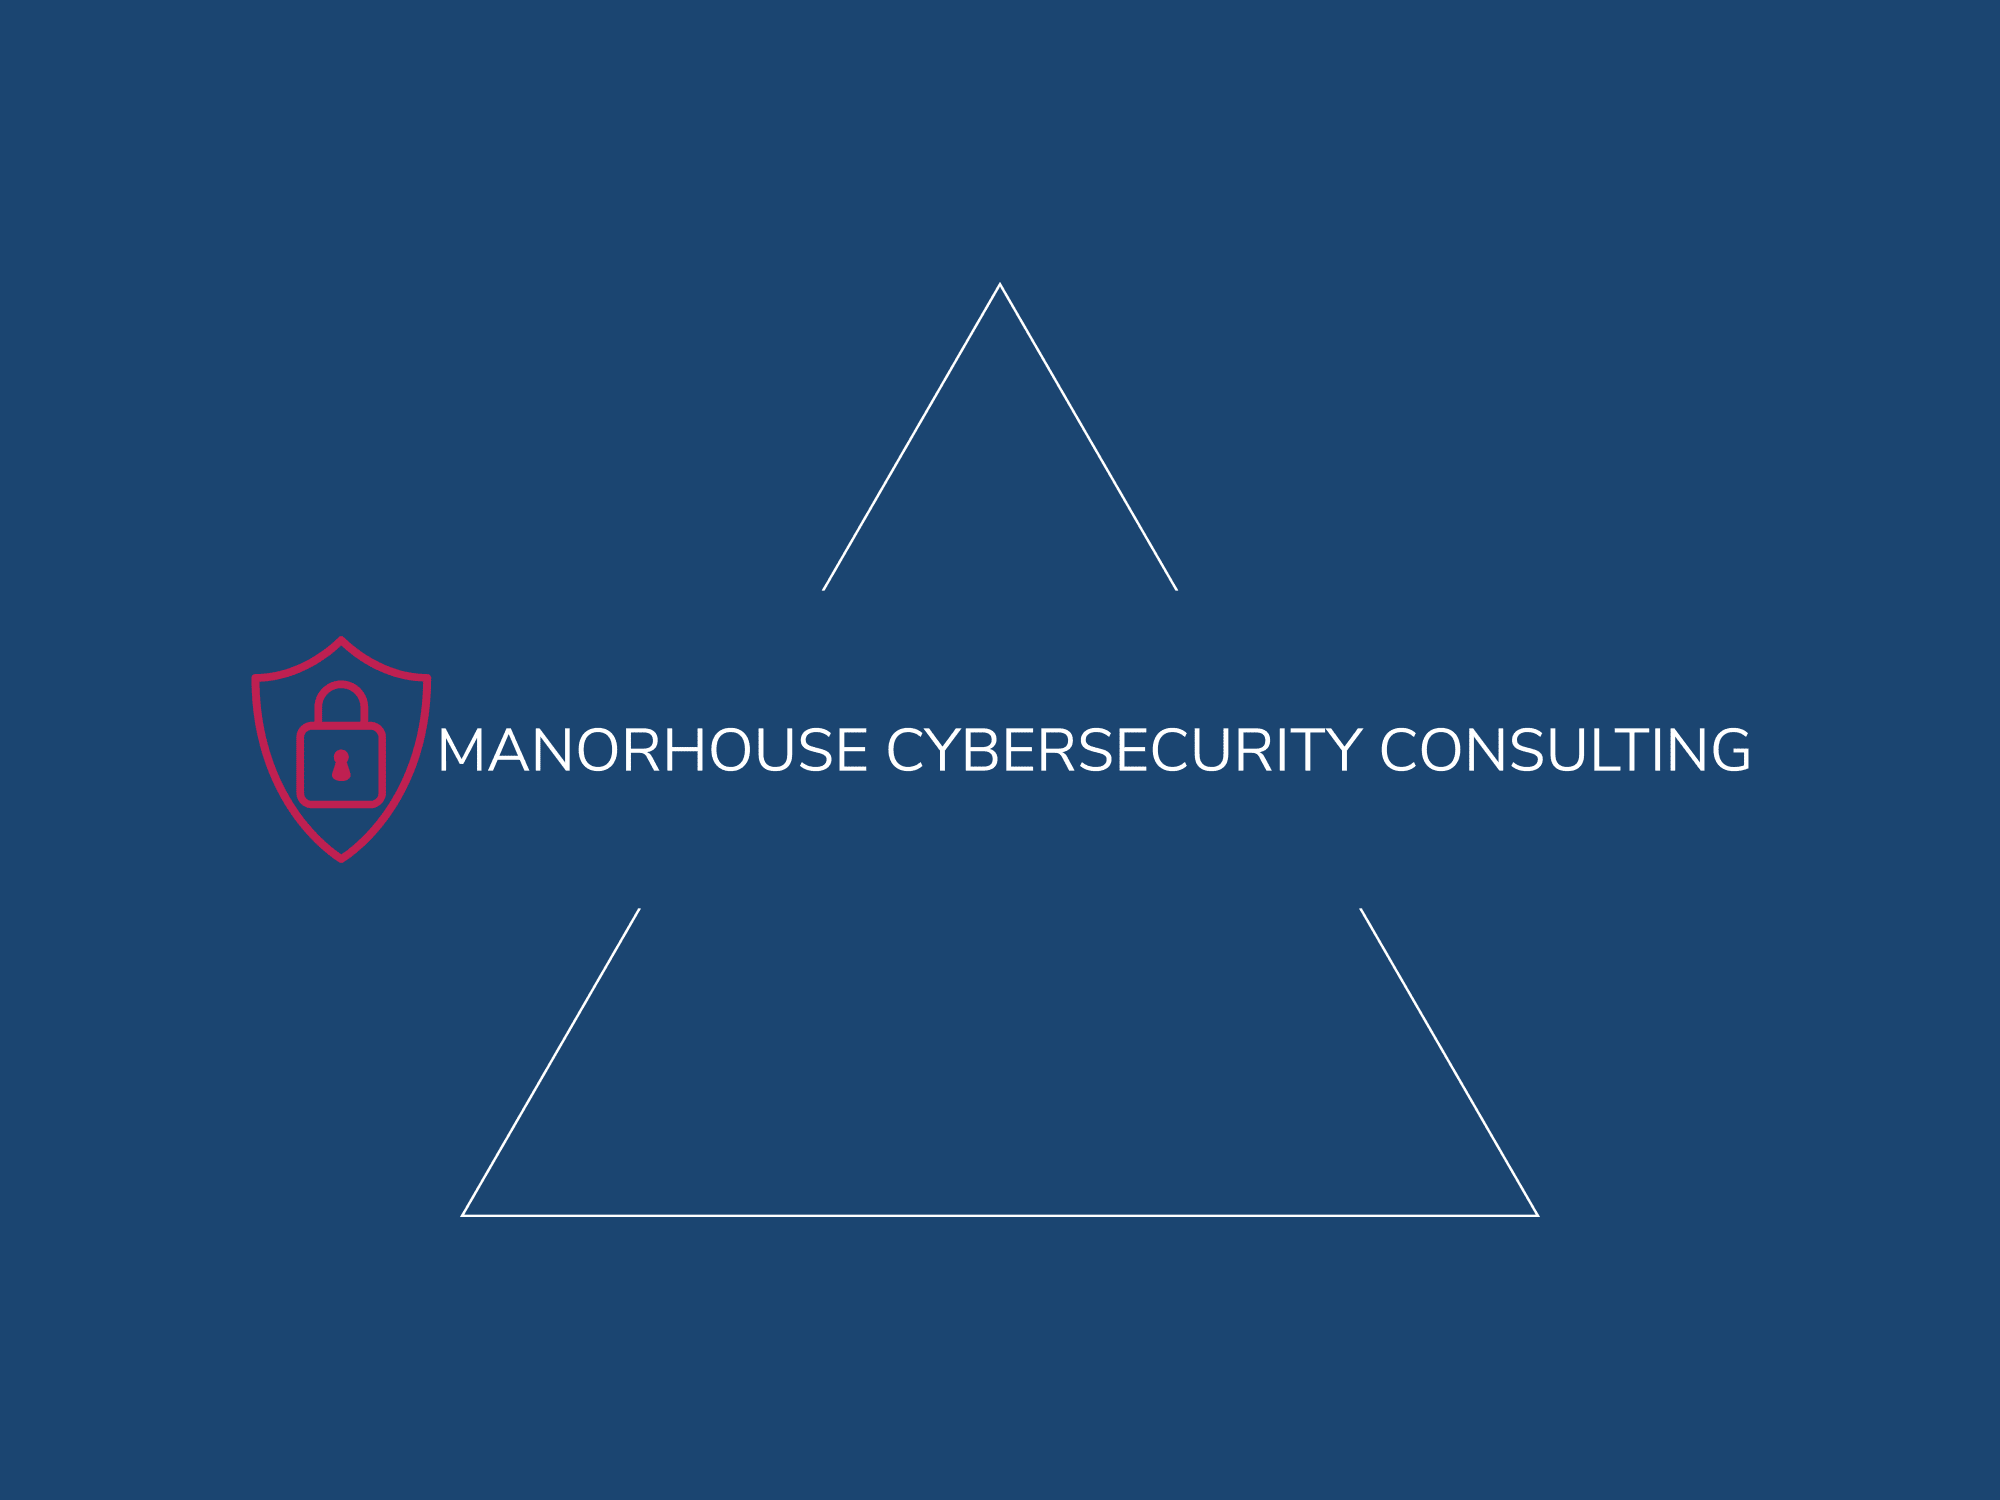 Manorhouse Cybersecurity Consulting